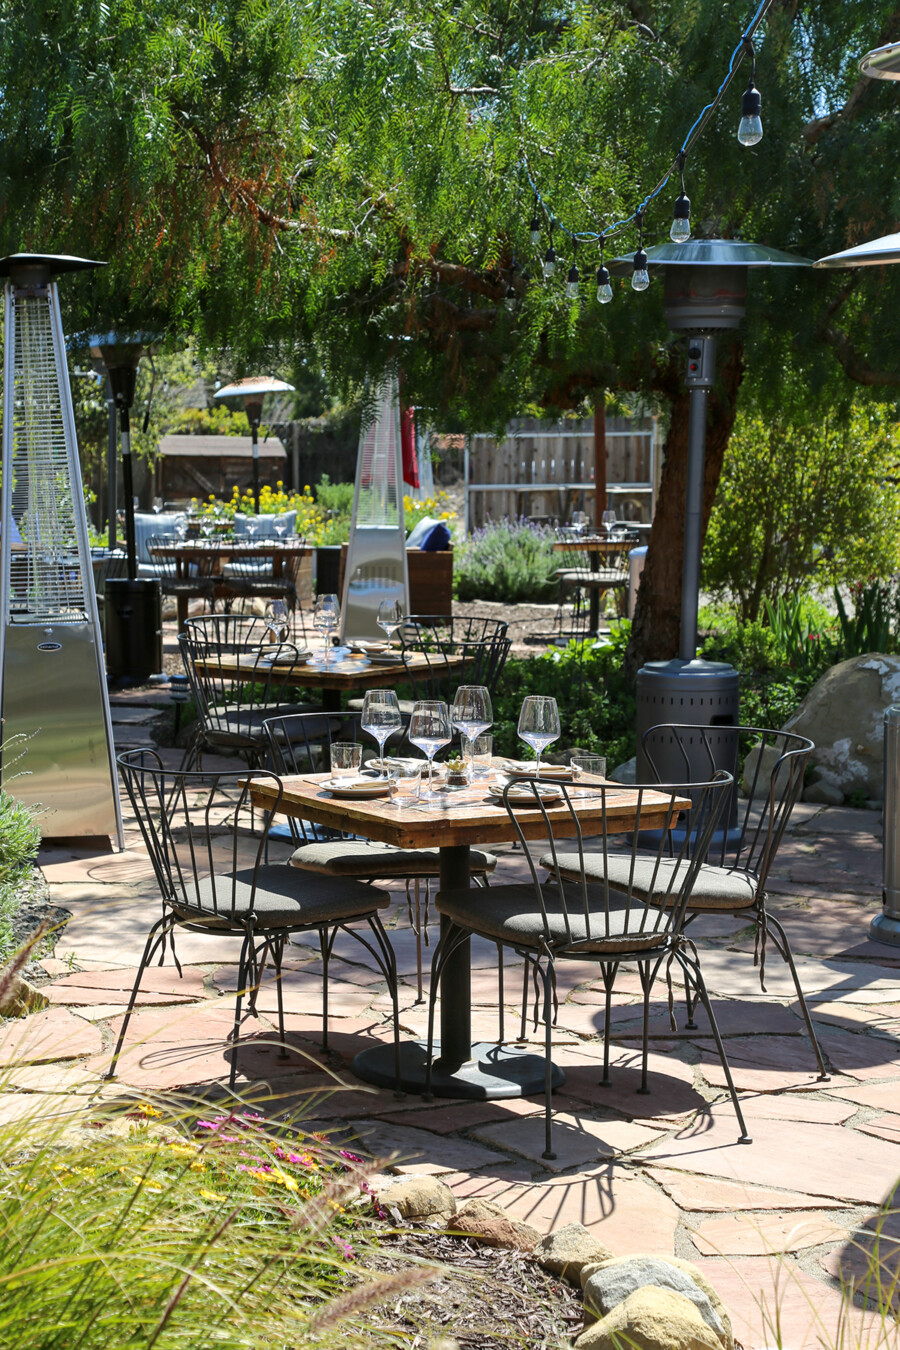 An outdoor patio table set for four at Pico in Los Alamos, California.